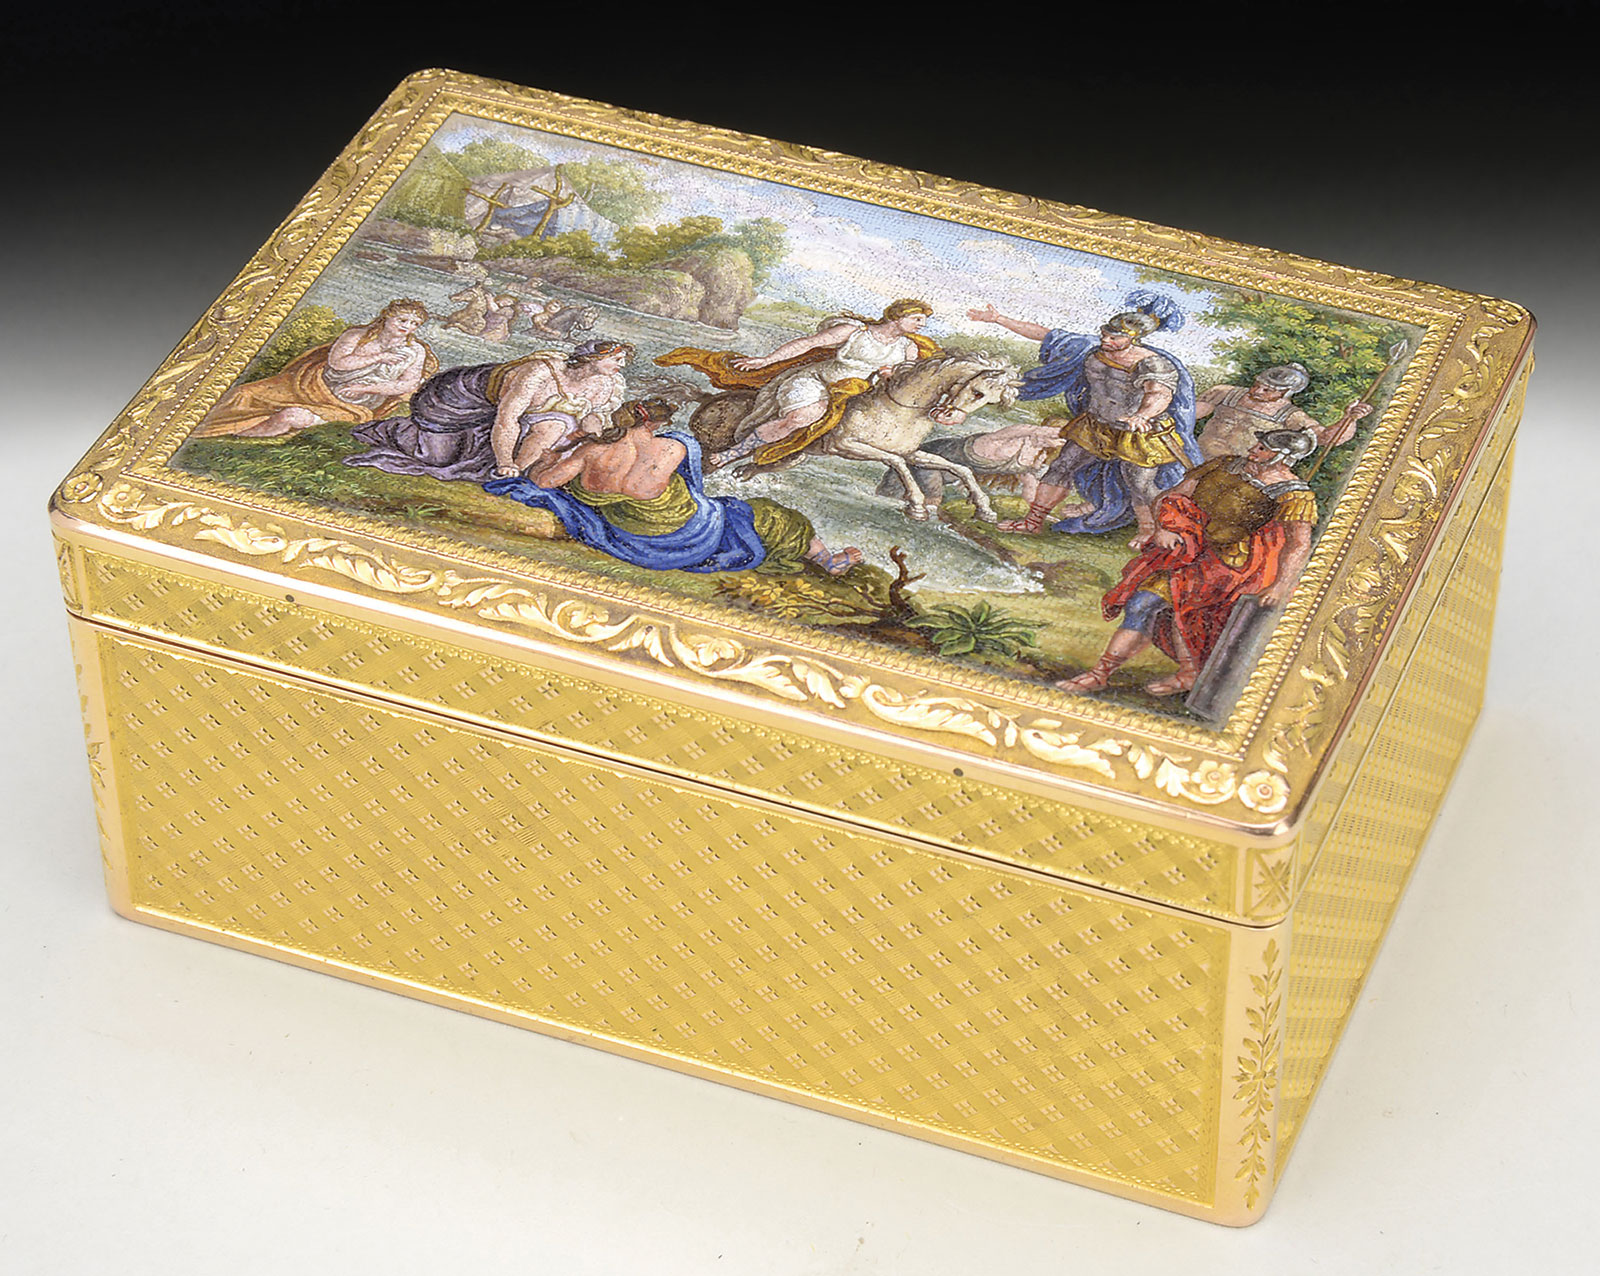 Solid Gold Russian Hinged Box with Micro Mosaic Classical Scene, estimated at $4,000-6,000.